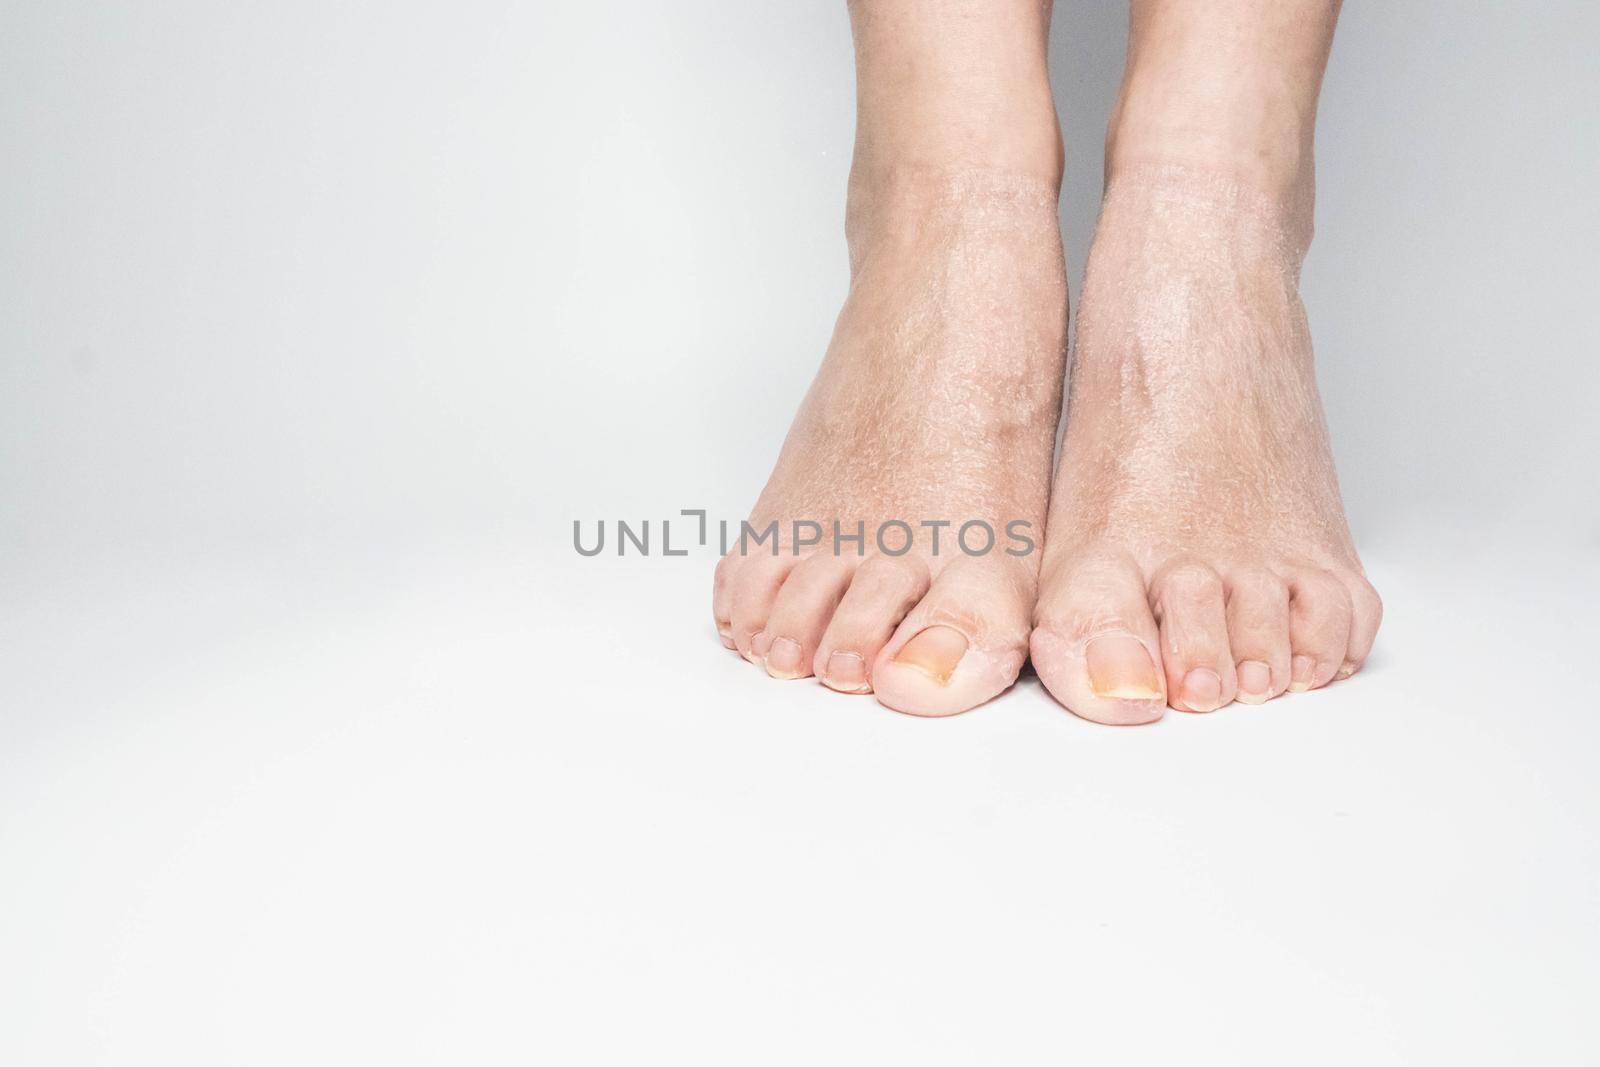 Close-up view female sore skin of feet, dry heels isolated on a white background